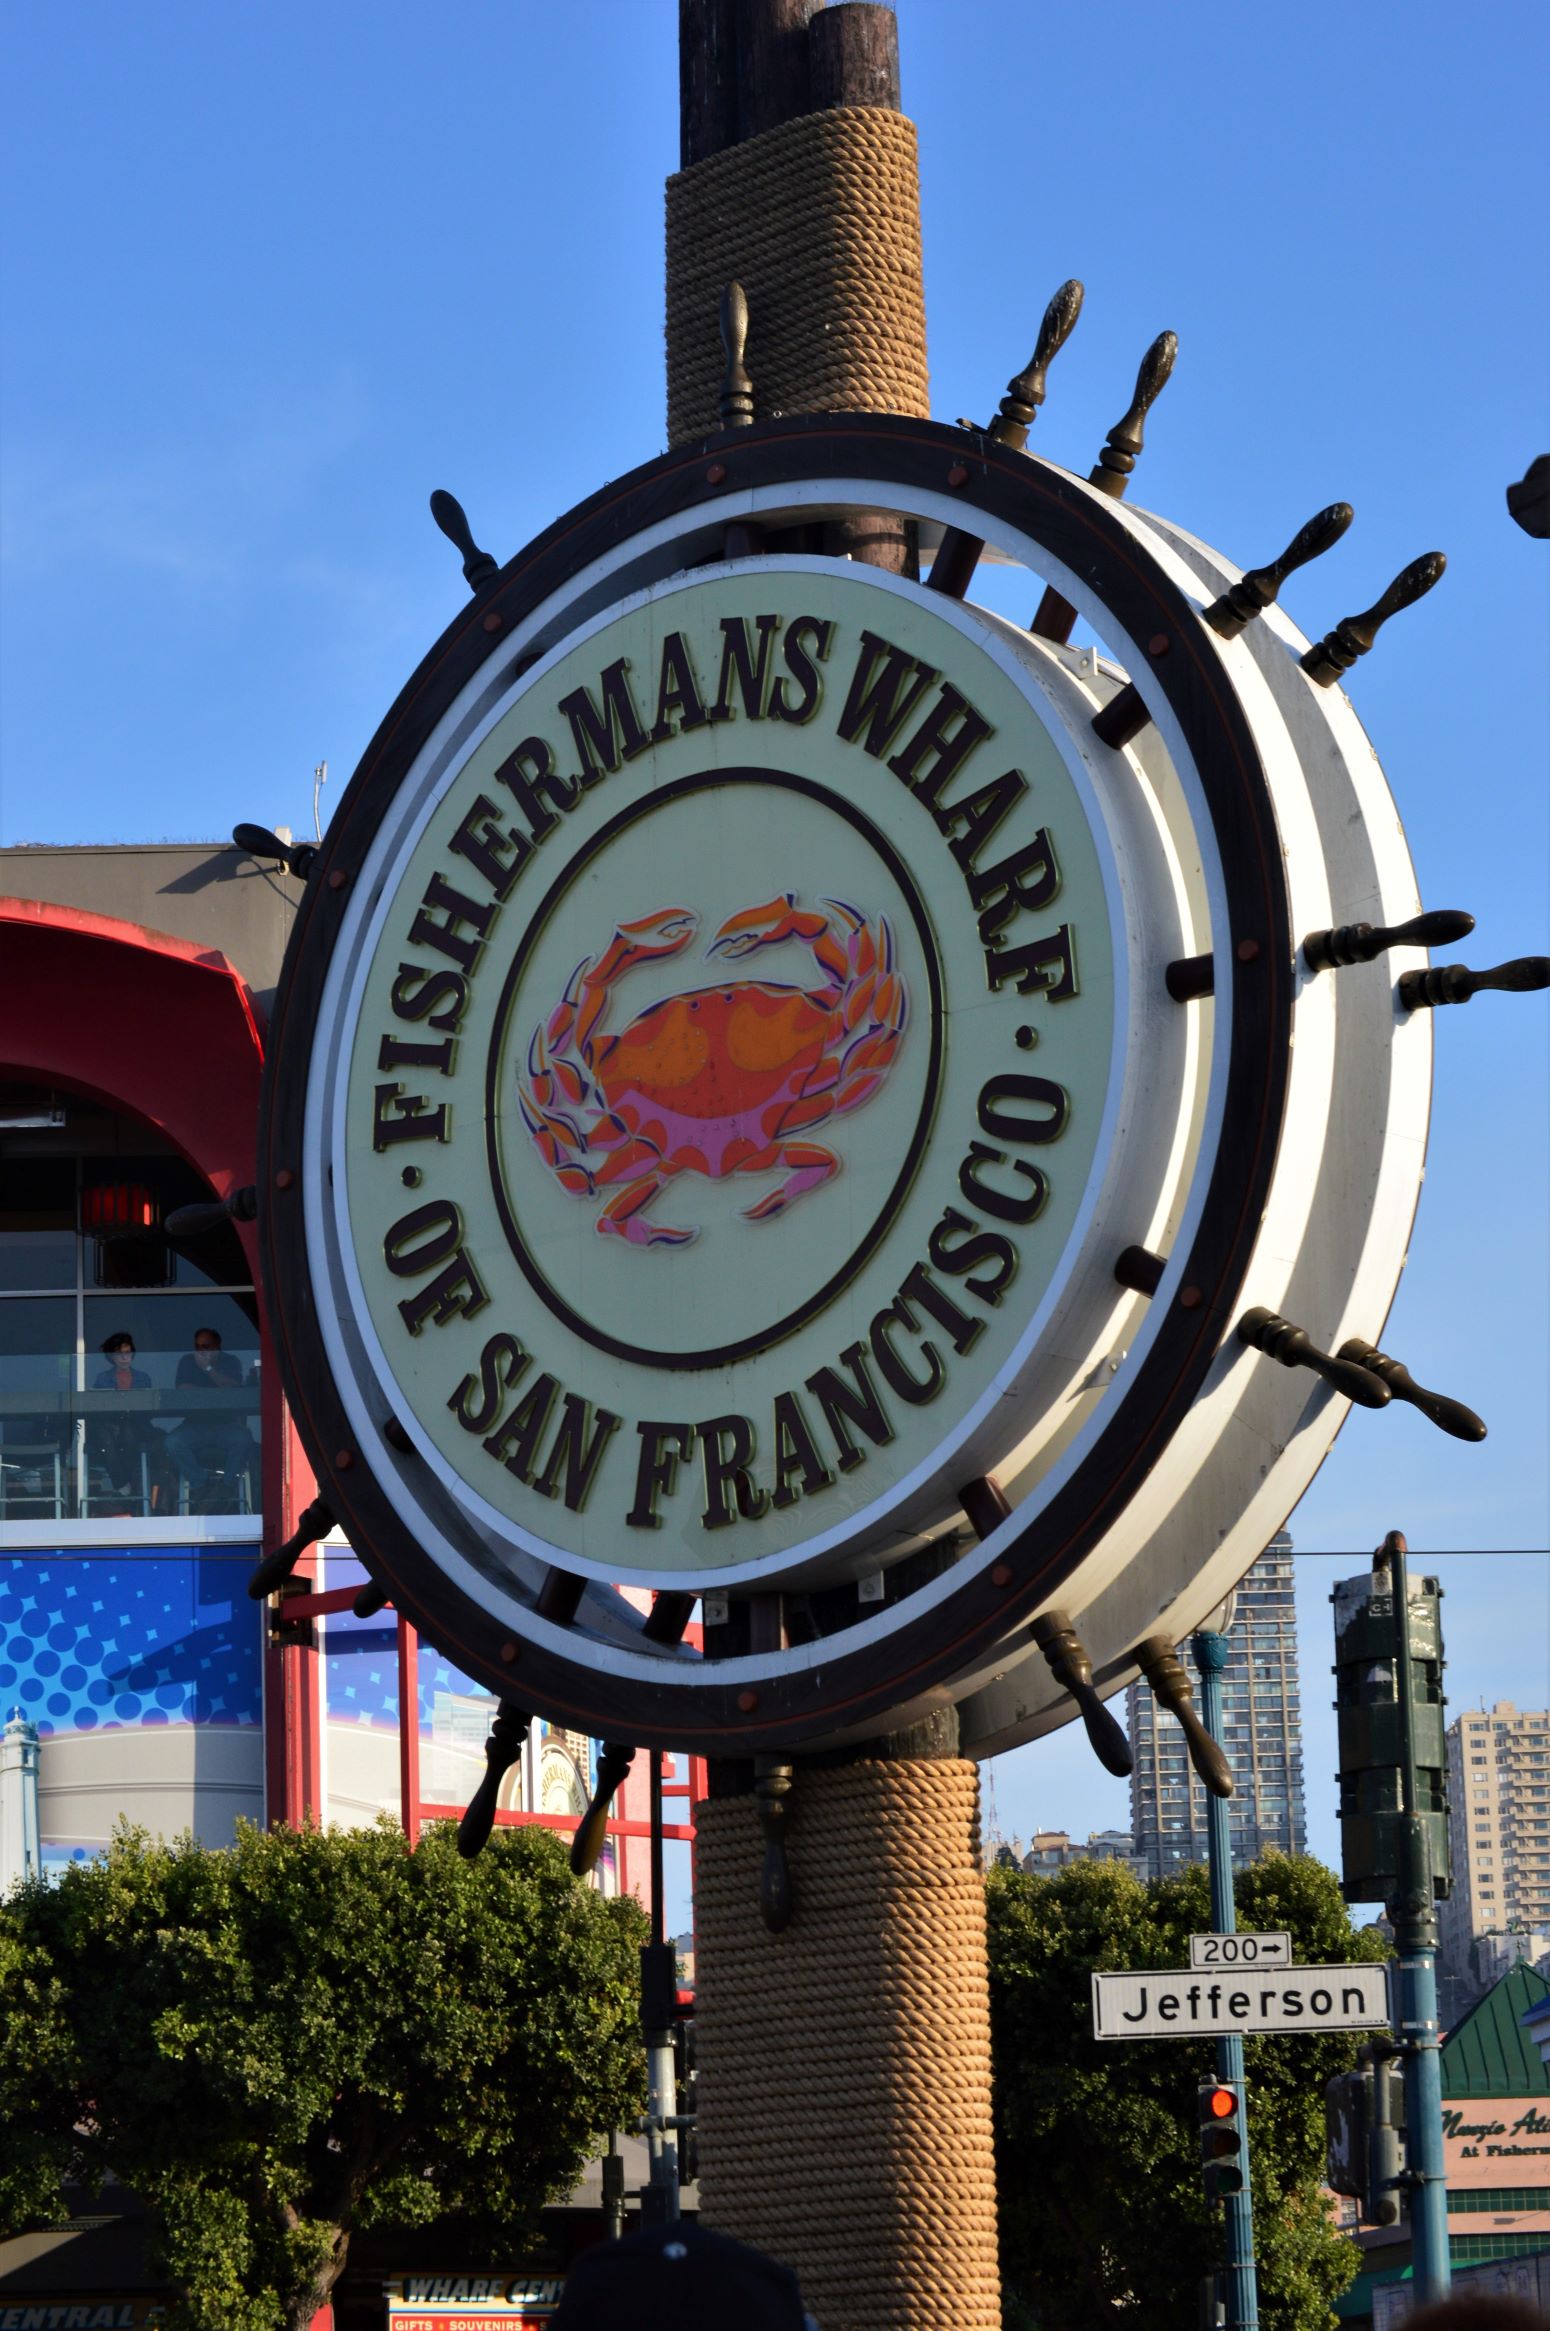 An image of the Fisherman's Wharf sign.